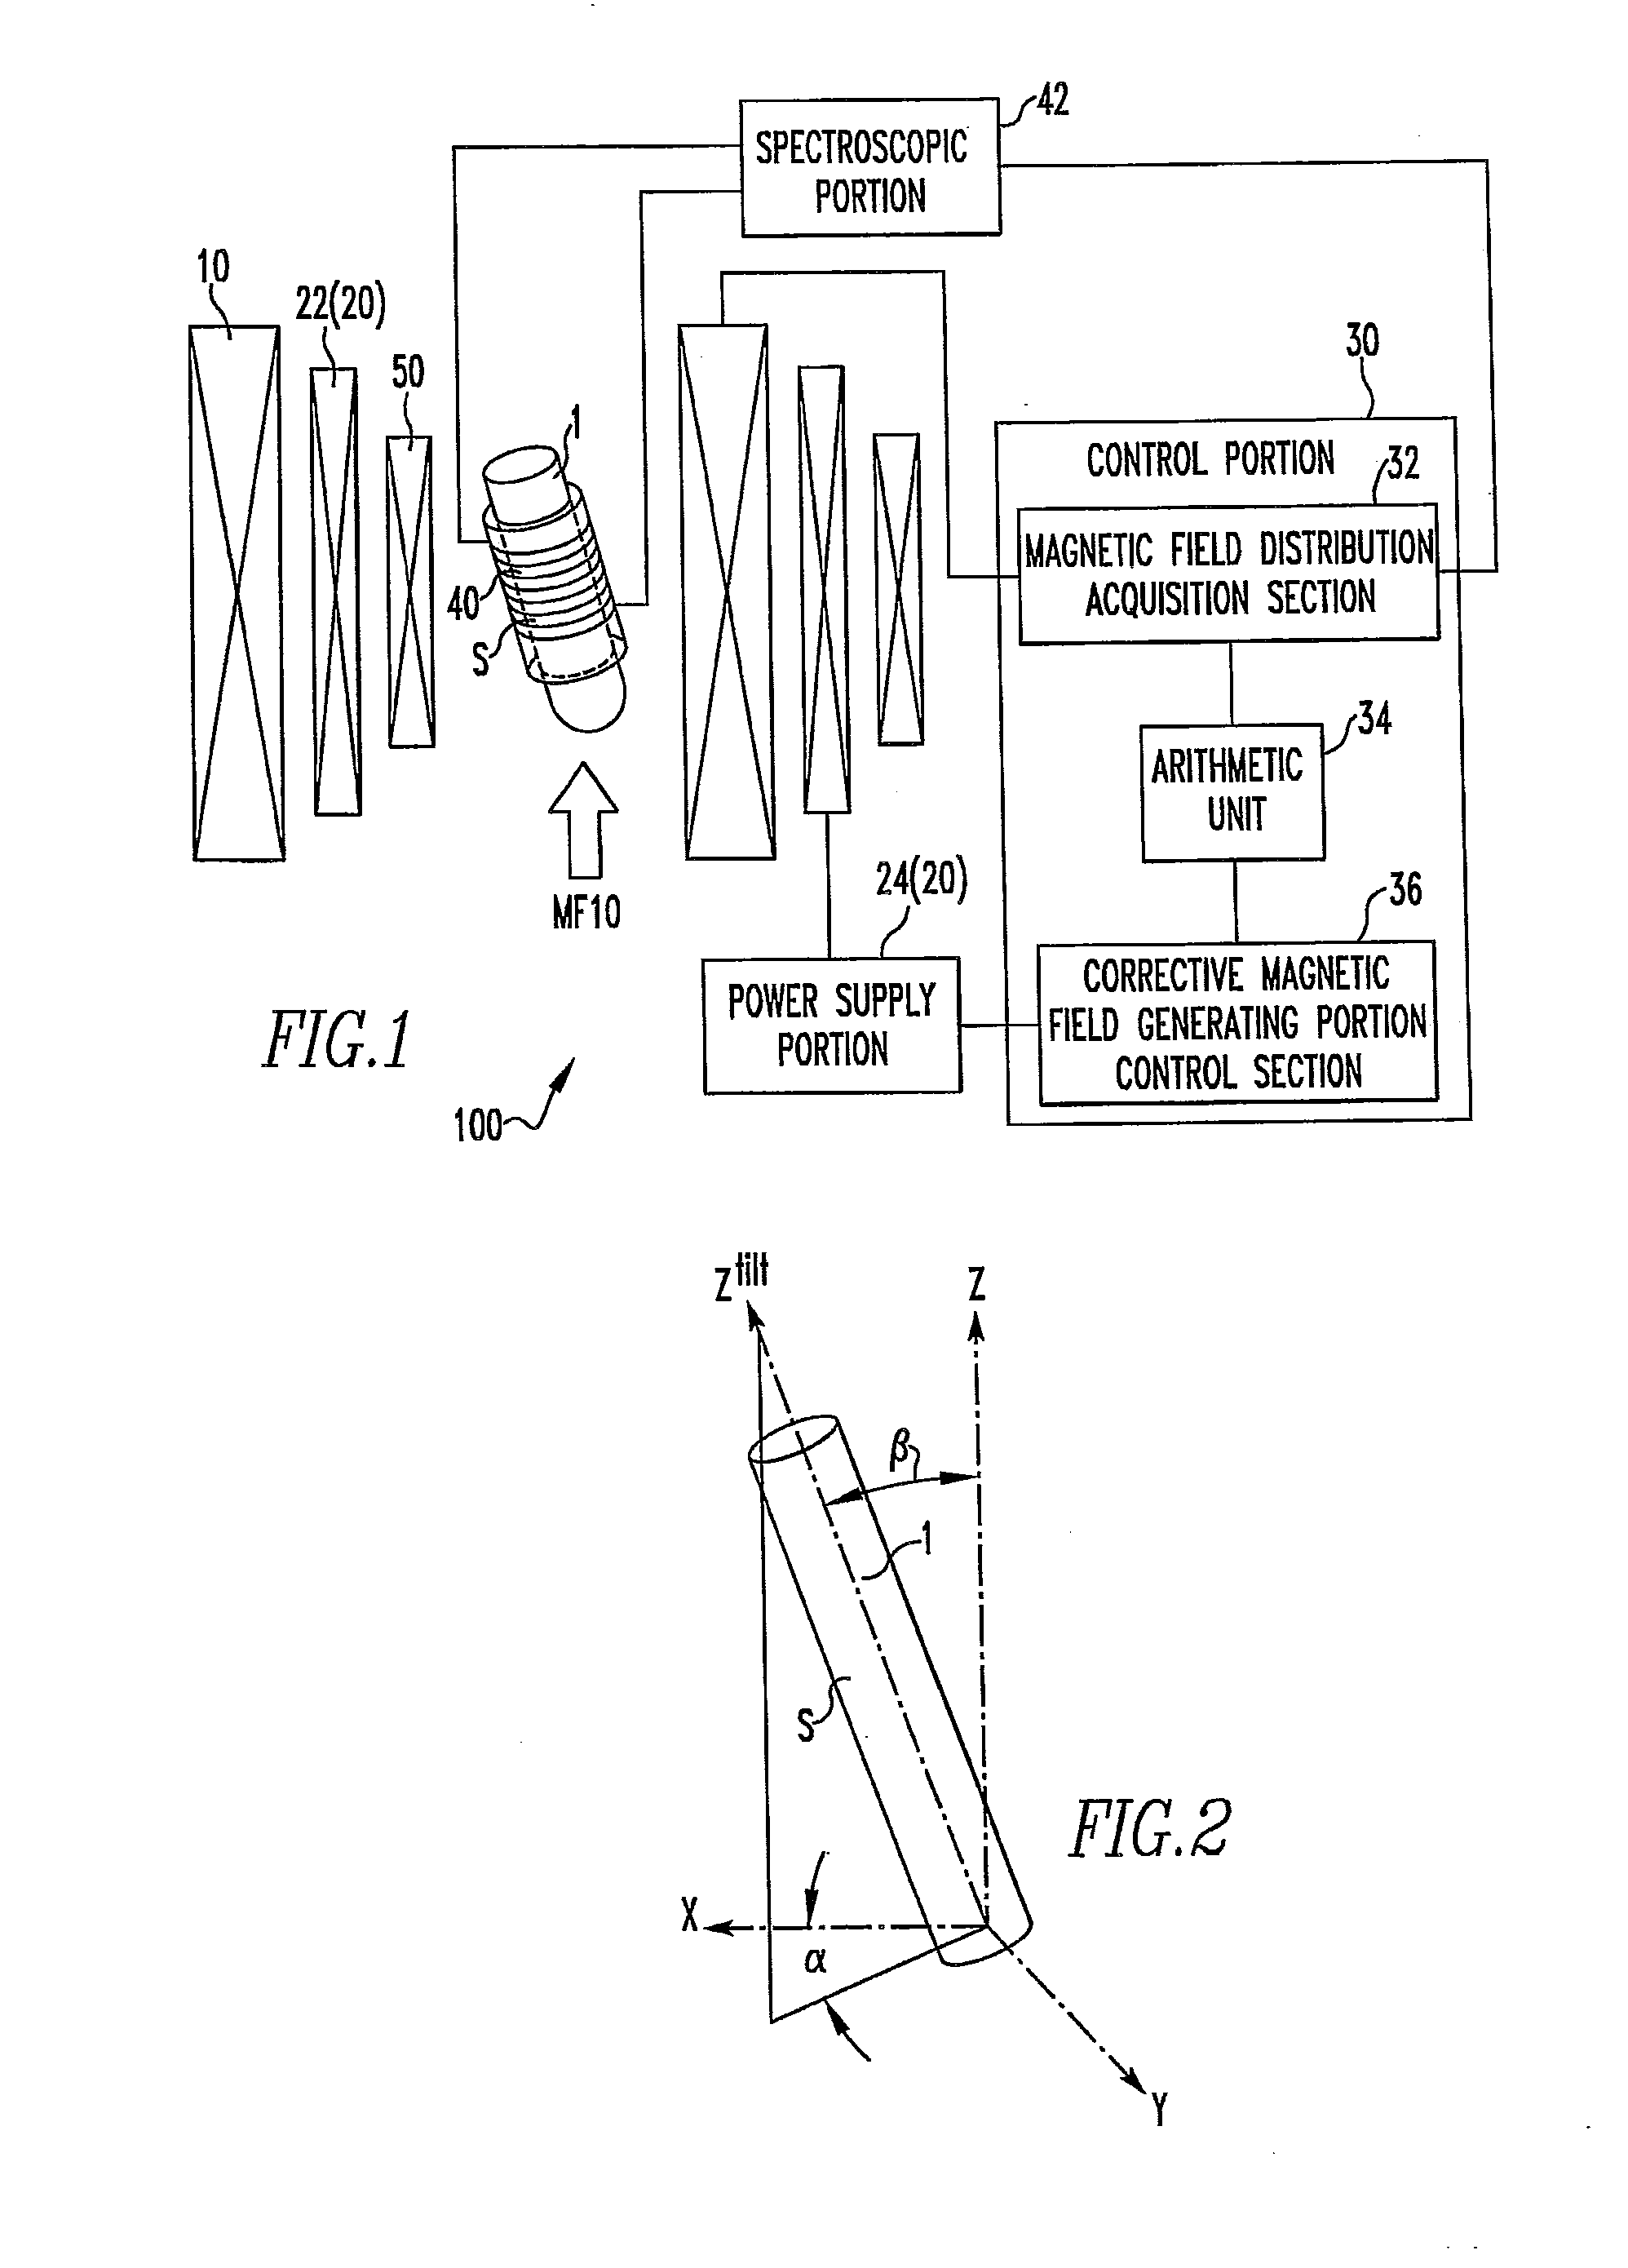 Nuclear Magnetic Resonance Spectrometer and Method of Magnetic Field Correction